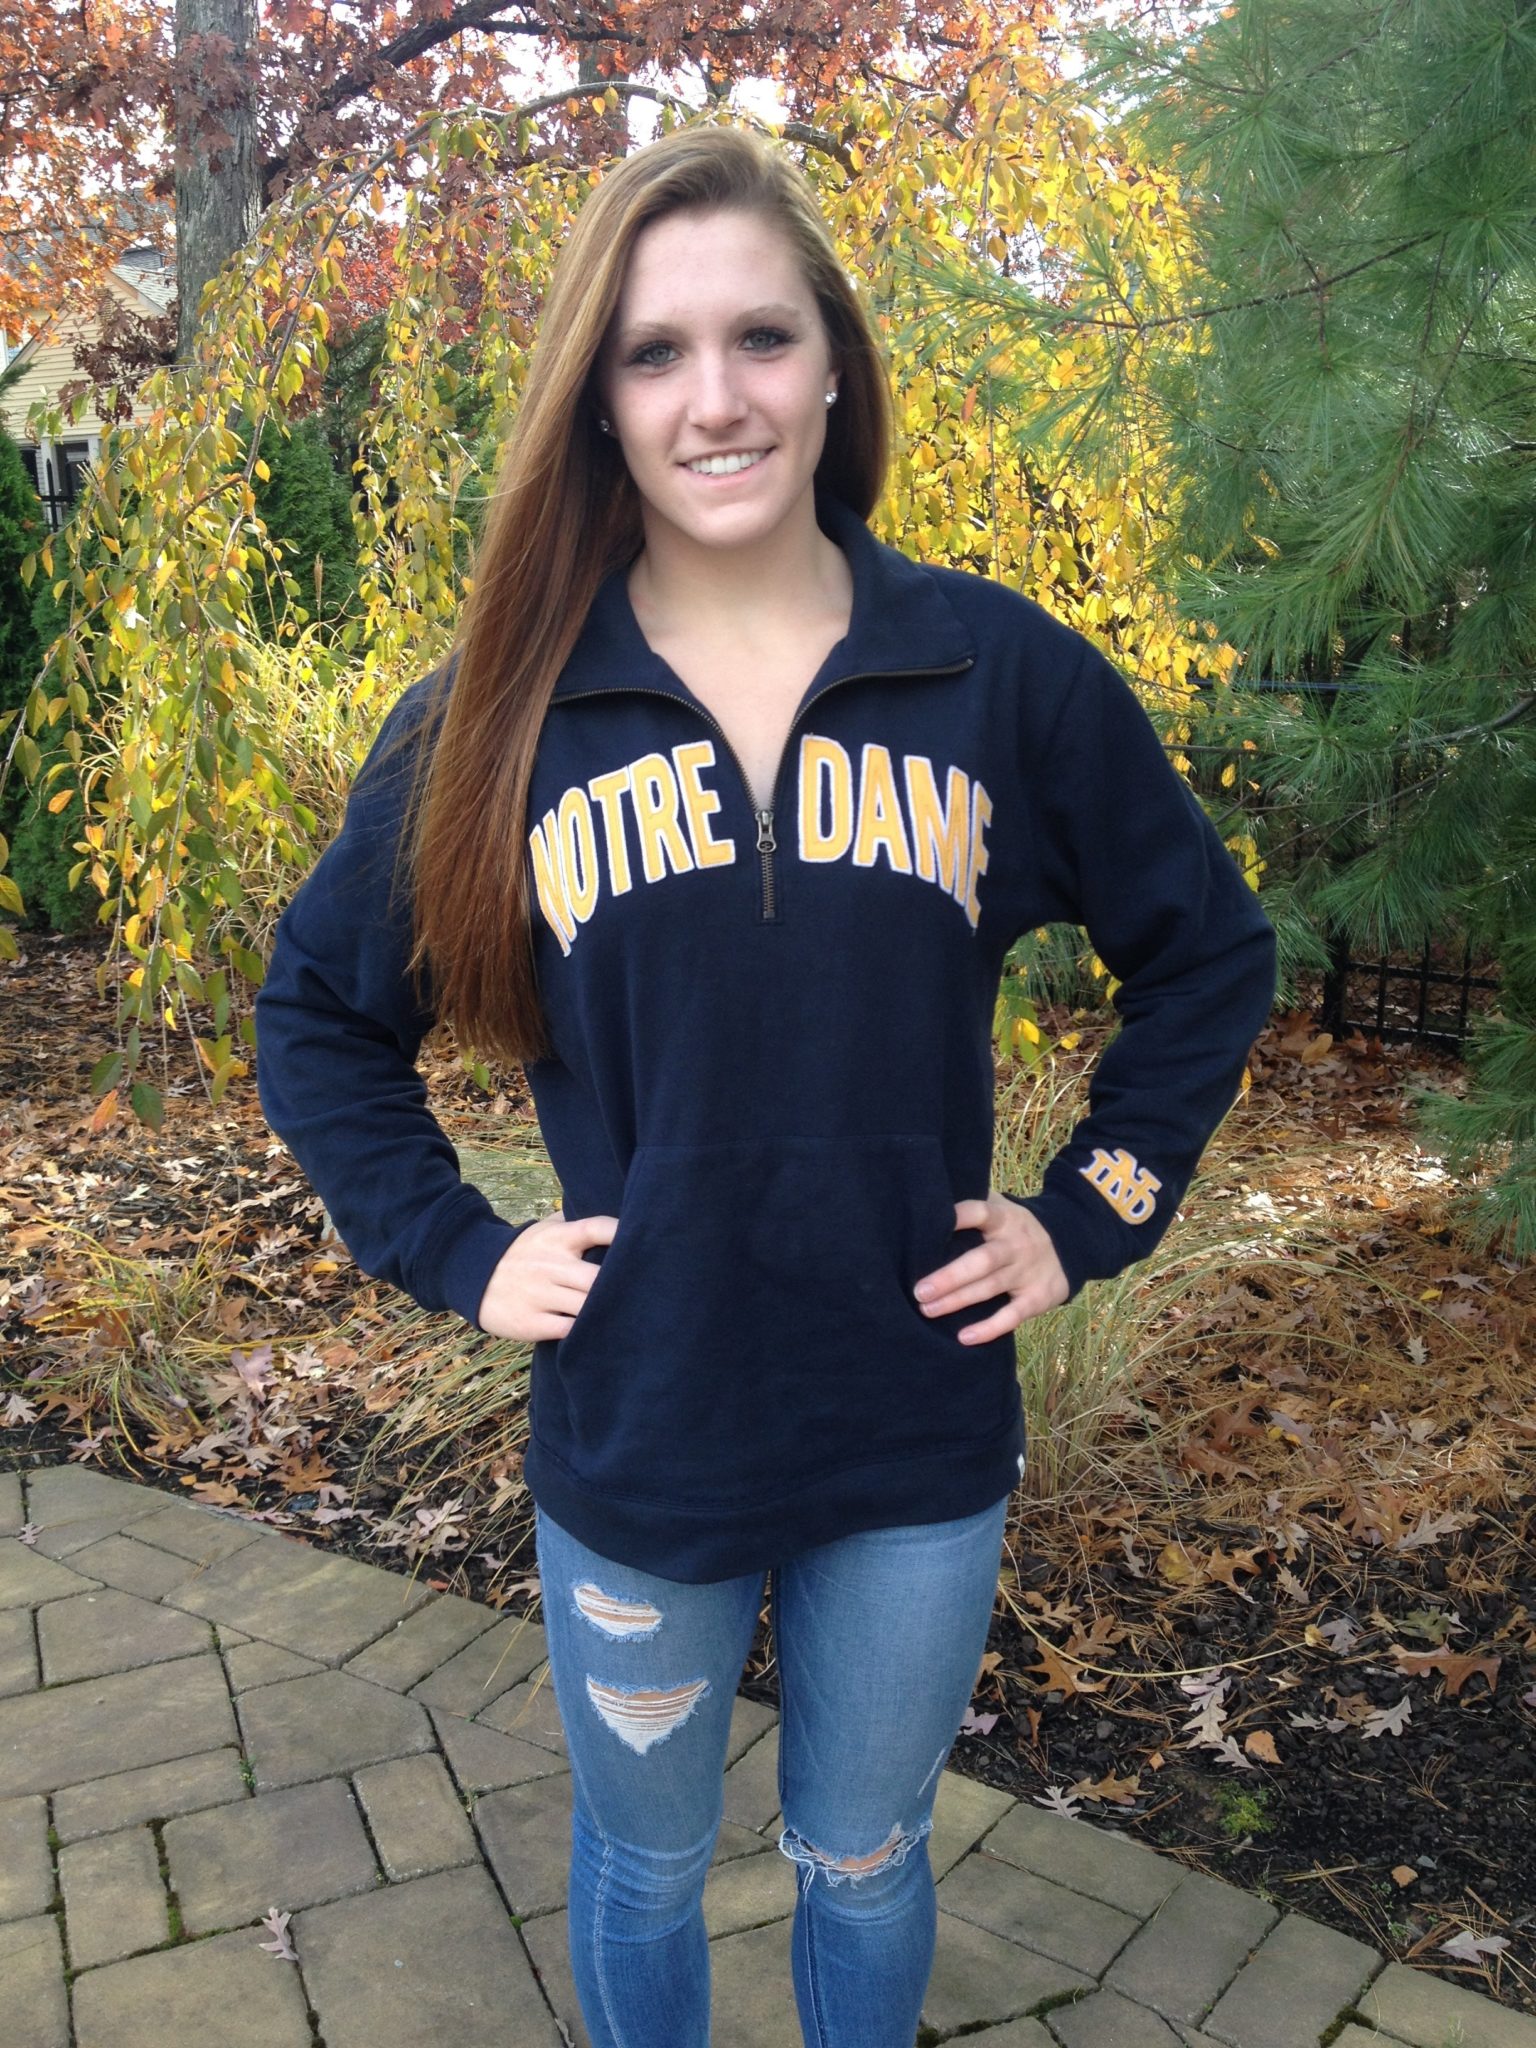 Meaghan O'Donnell to Swim for the Notre Dame Fighting Irish